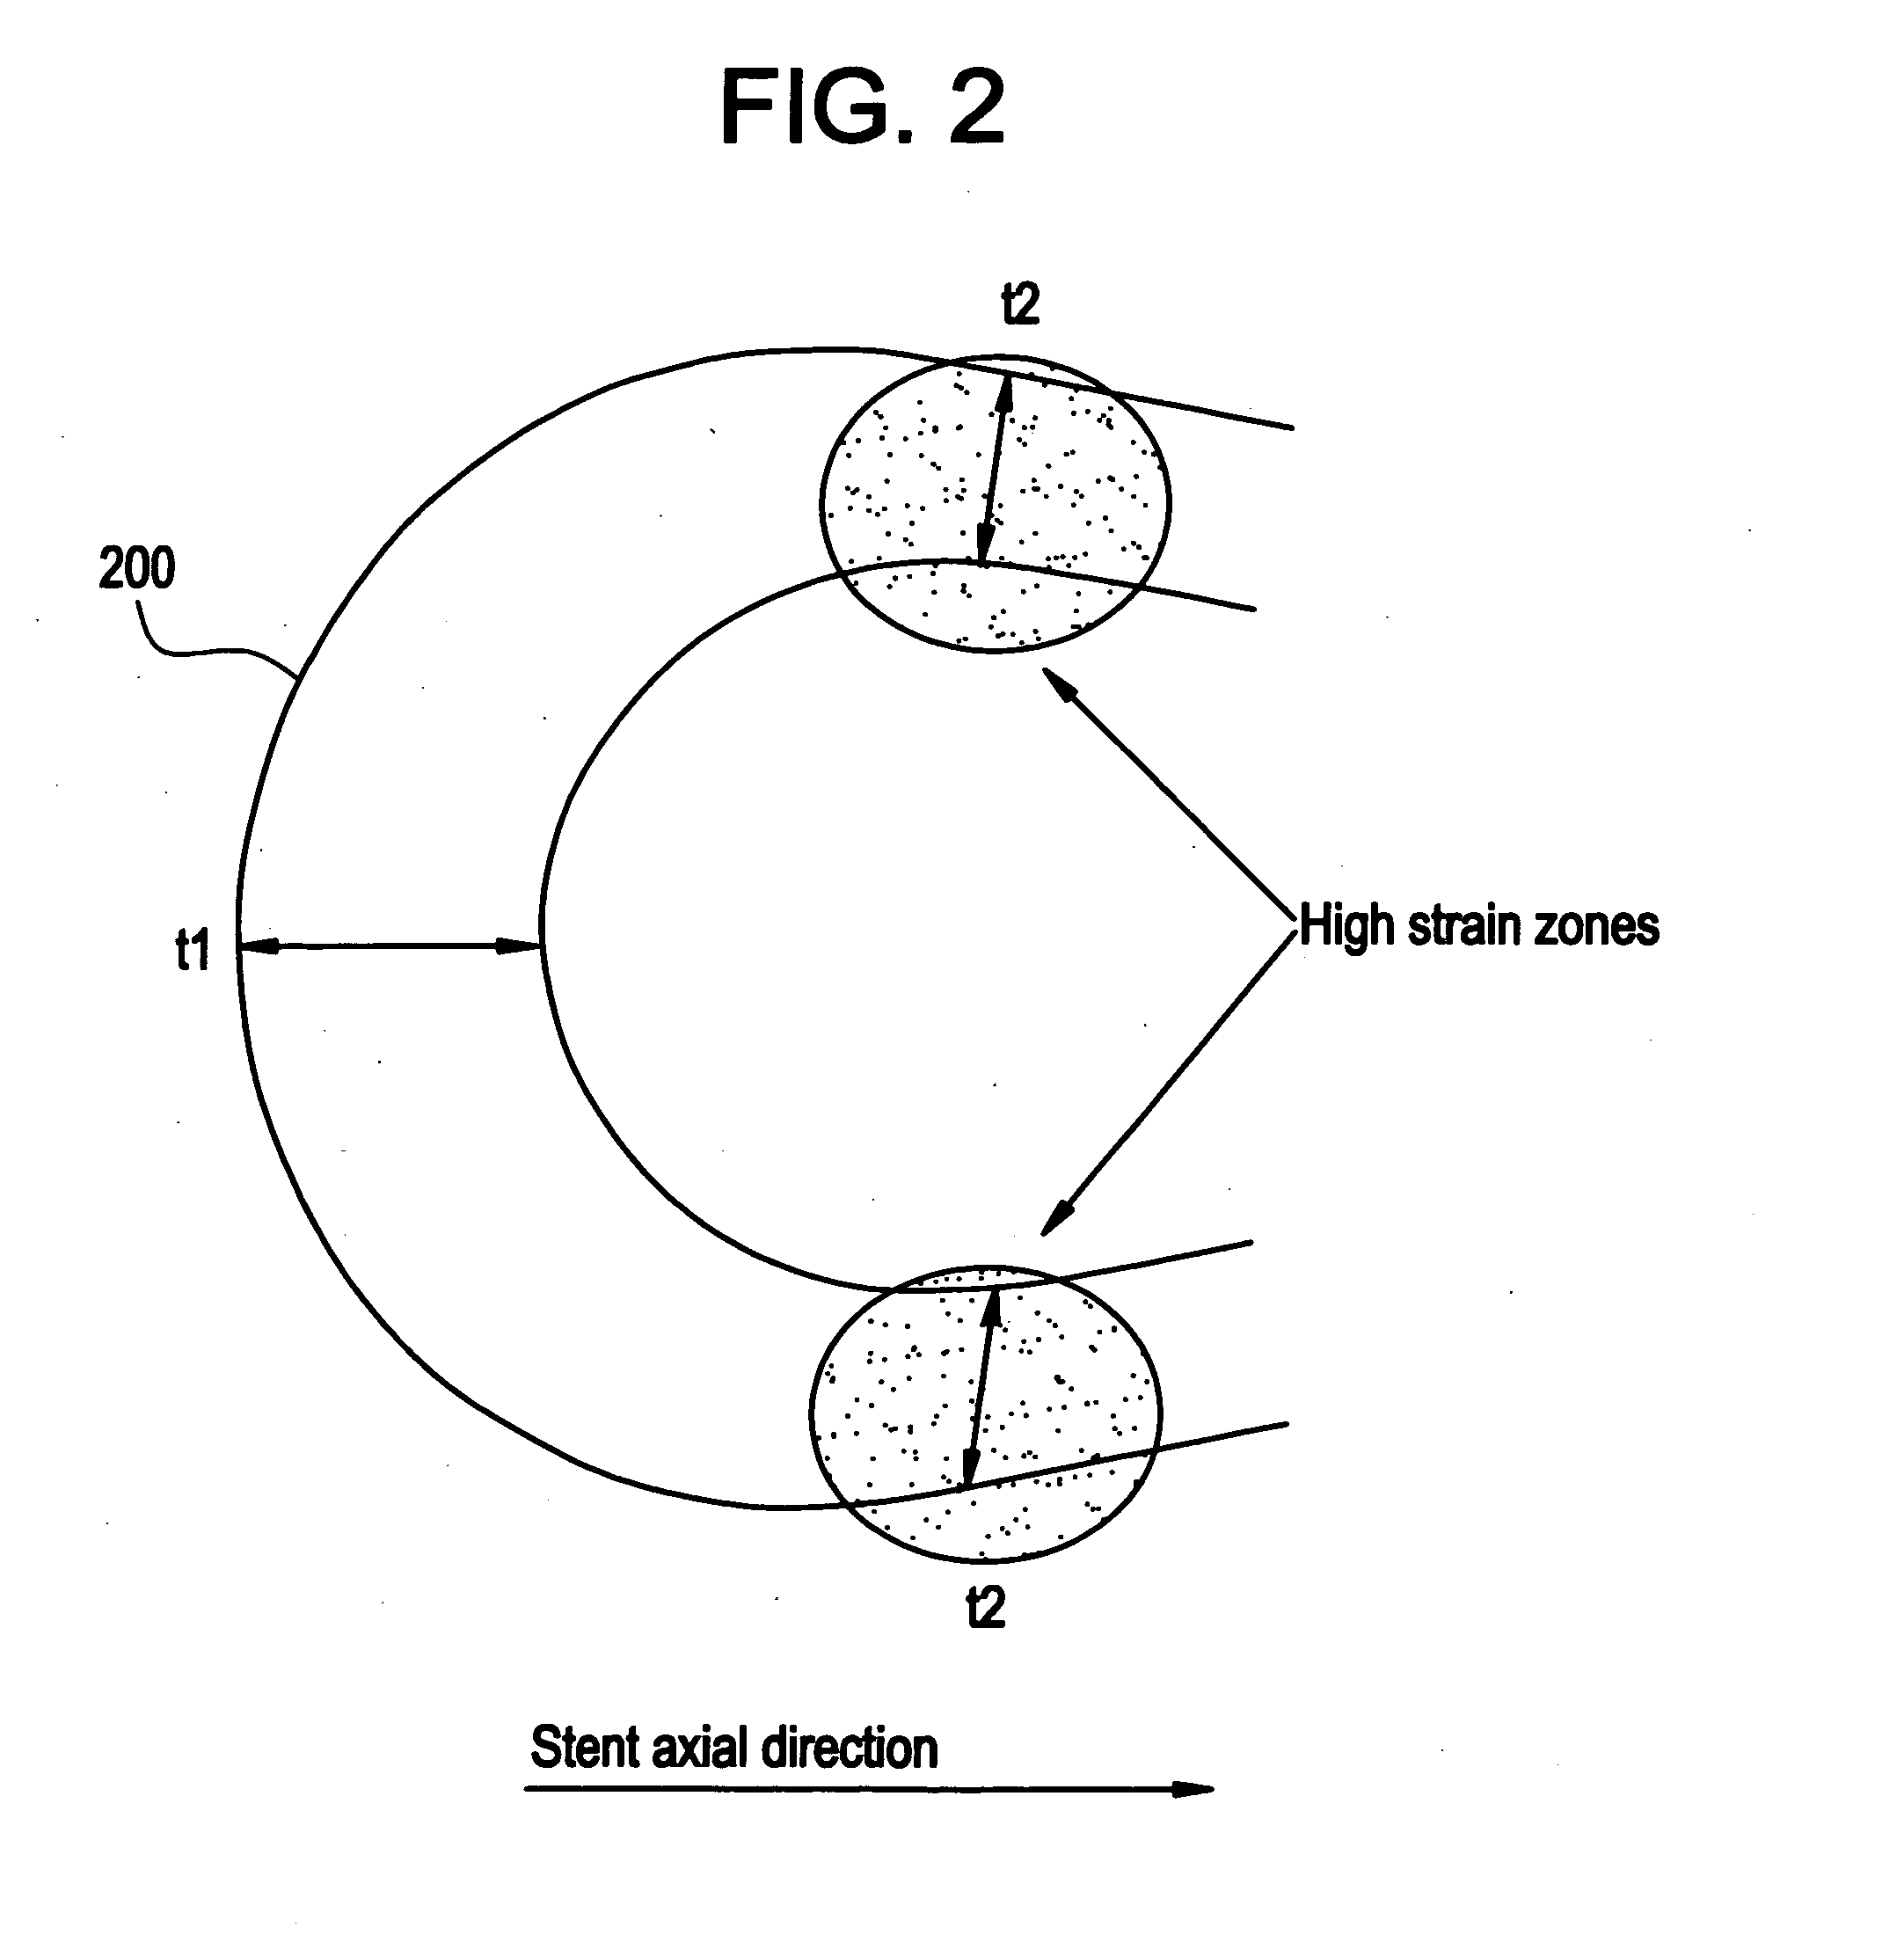 Polymeric stent having modified molecular structures in the flexible connectors and the radial struts of the hoops